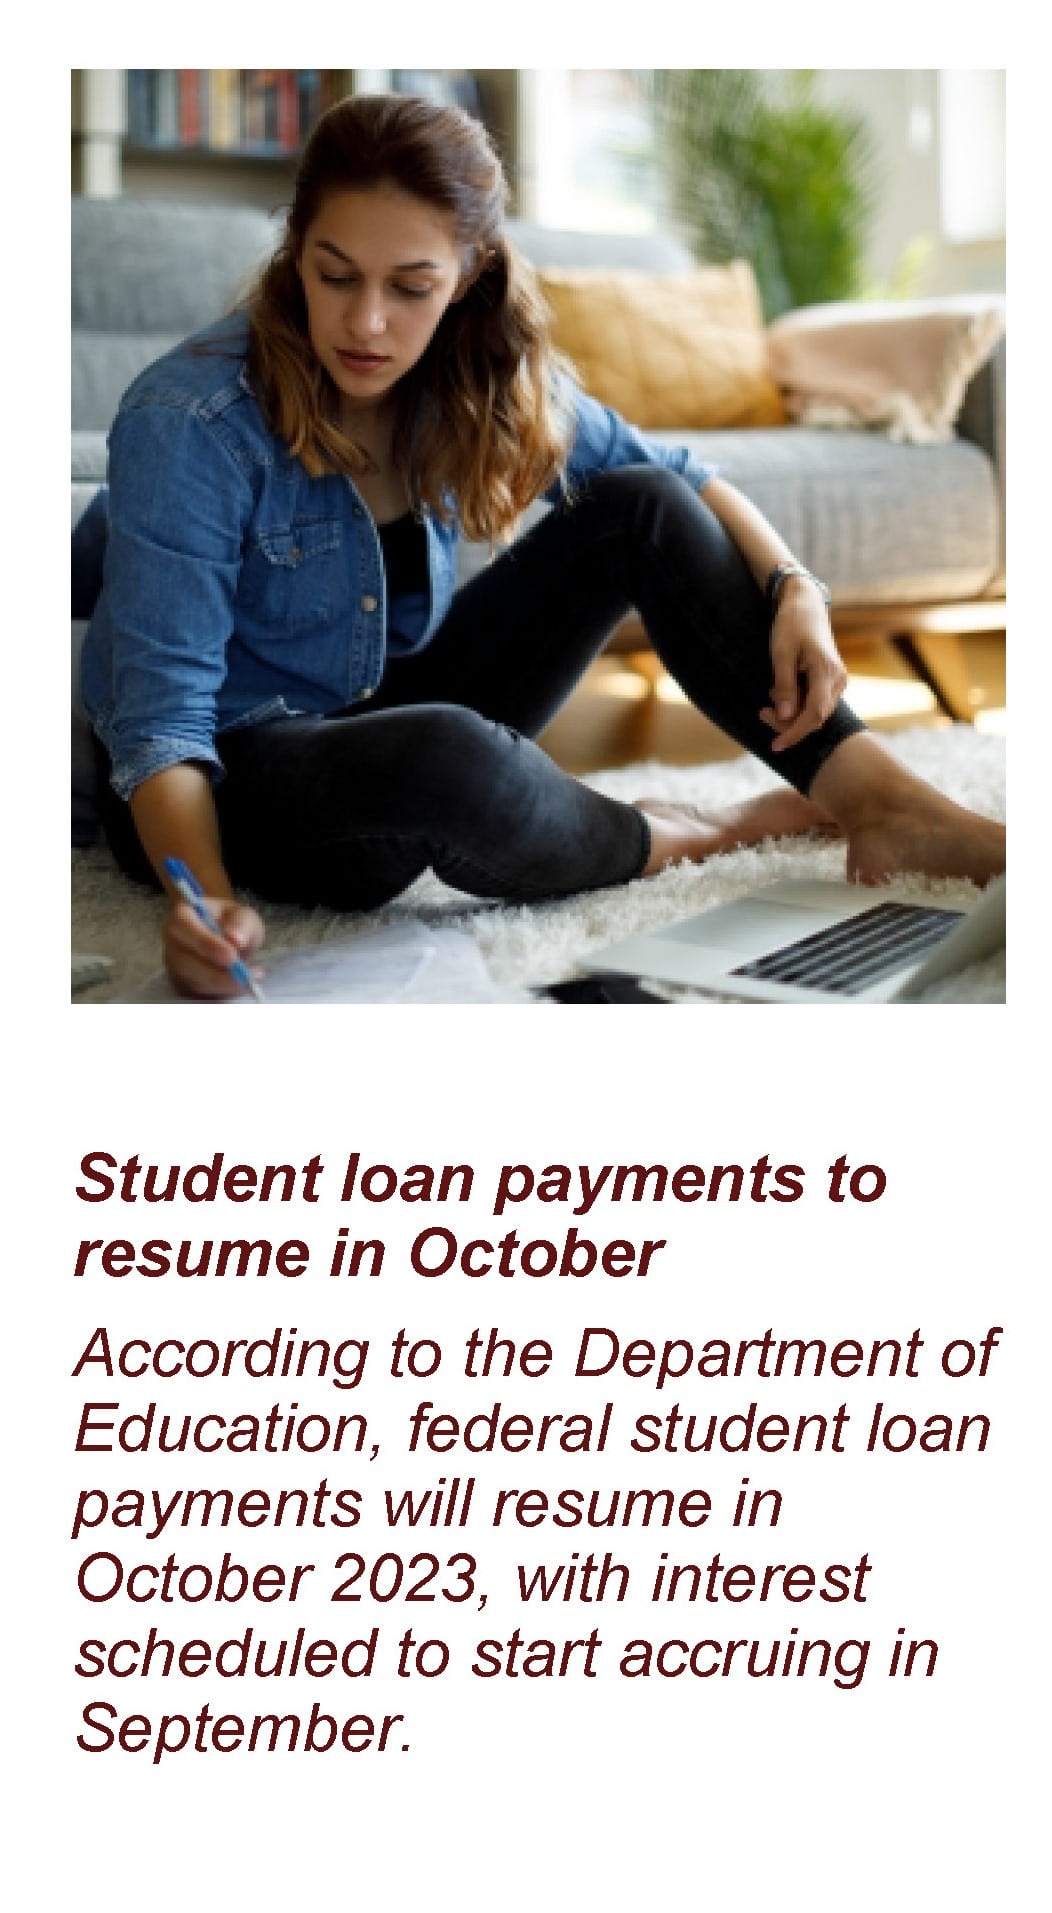 Person looking at papers and a laptop looking a bit worried. Text: Student loan payments to resume in October. According to the Department of Education, federal student loan payments will resume in October 2023, with interest schedules to start accruing in September. Article title: U.S. Supreme Court Blocks Student Loan Cancellation, Payments to Resume